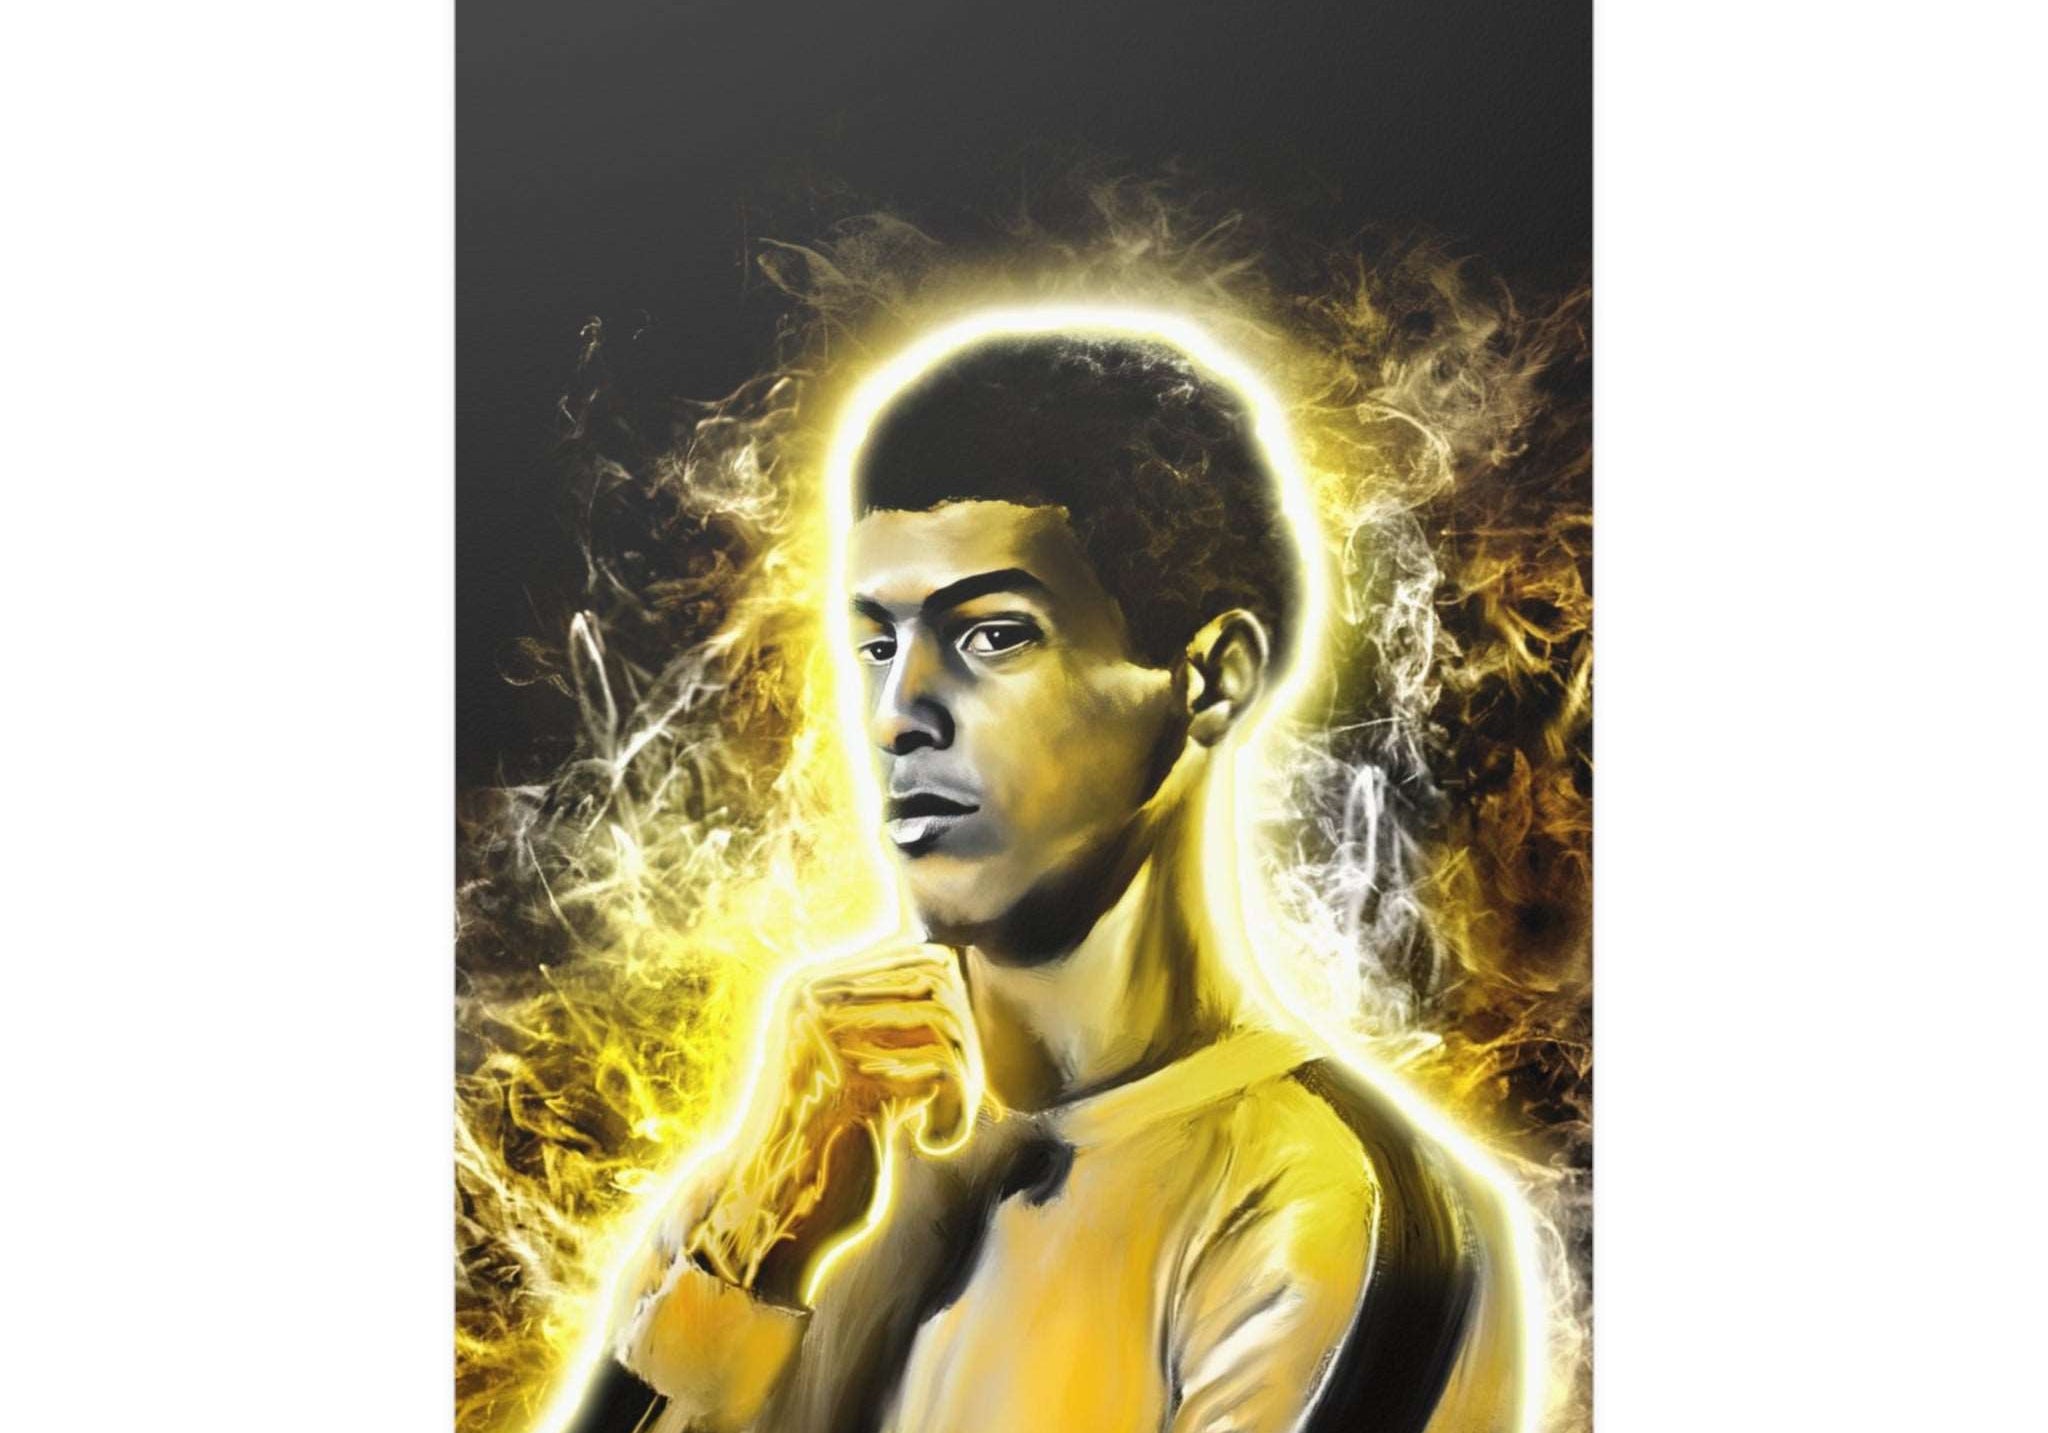 Bruce Leroy | The Glow Poster - Androo's Art